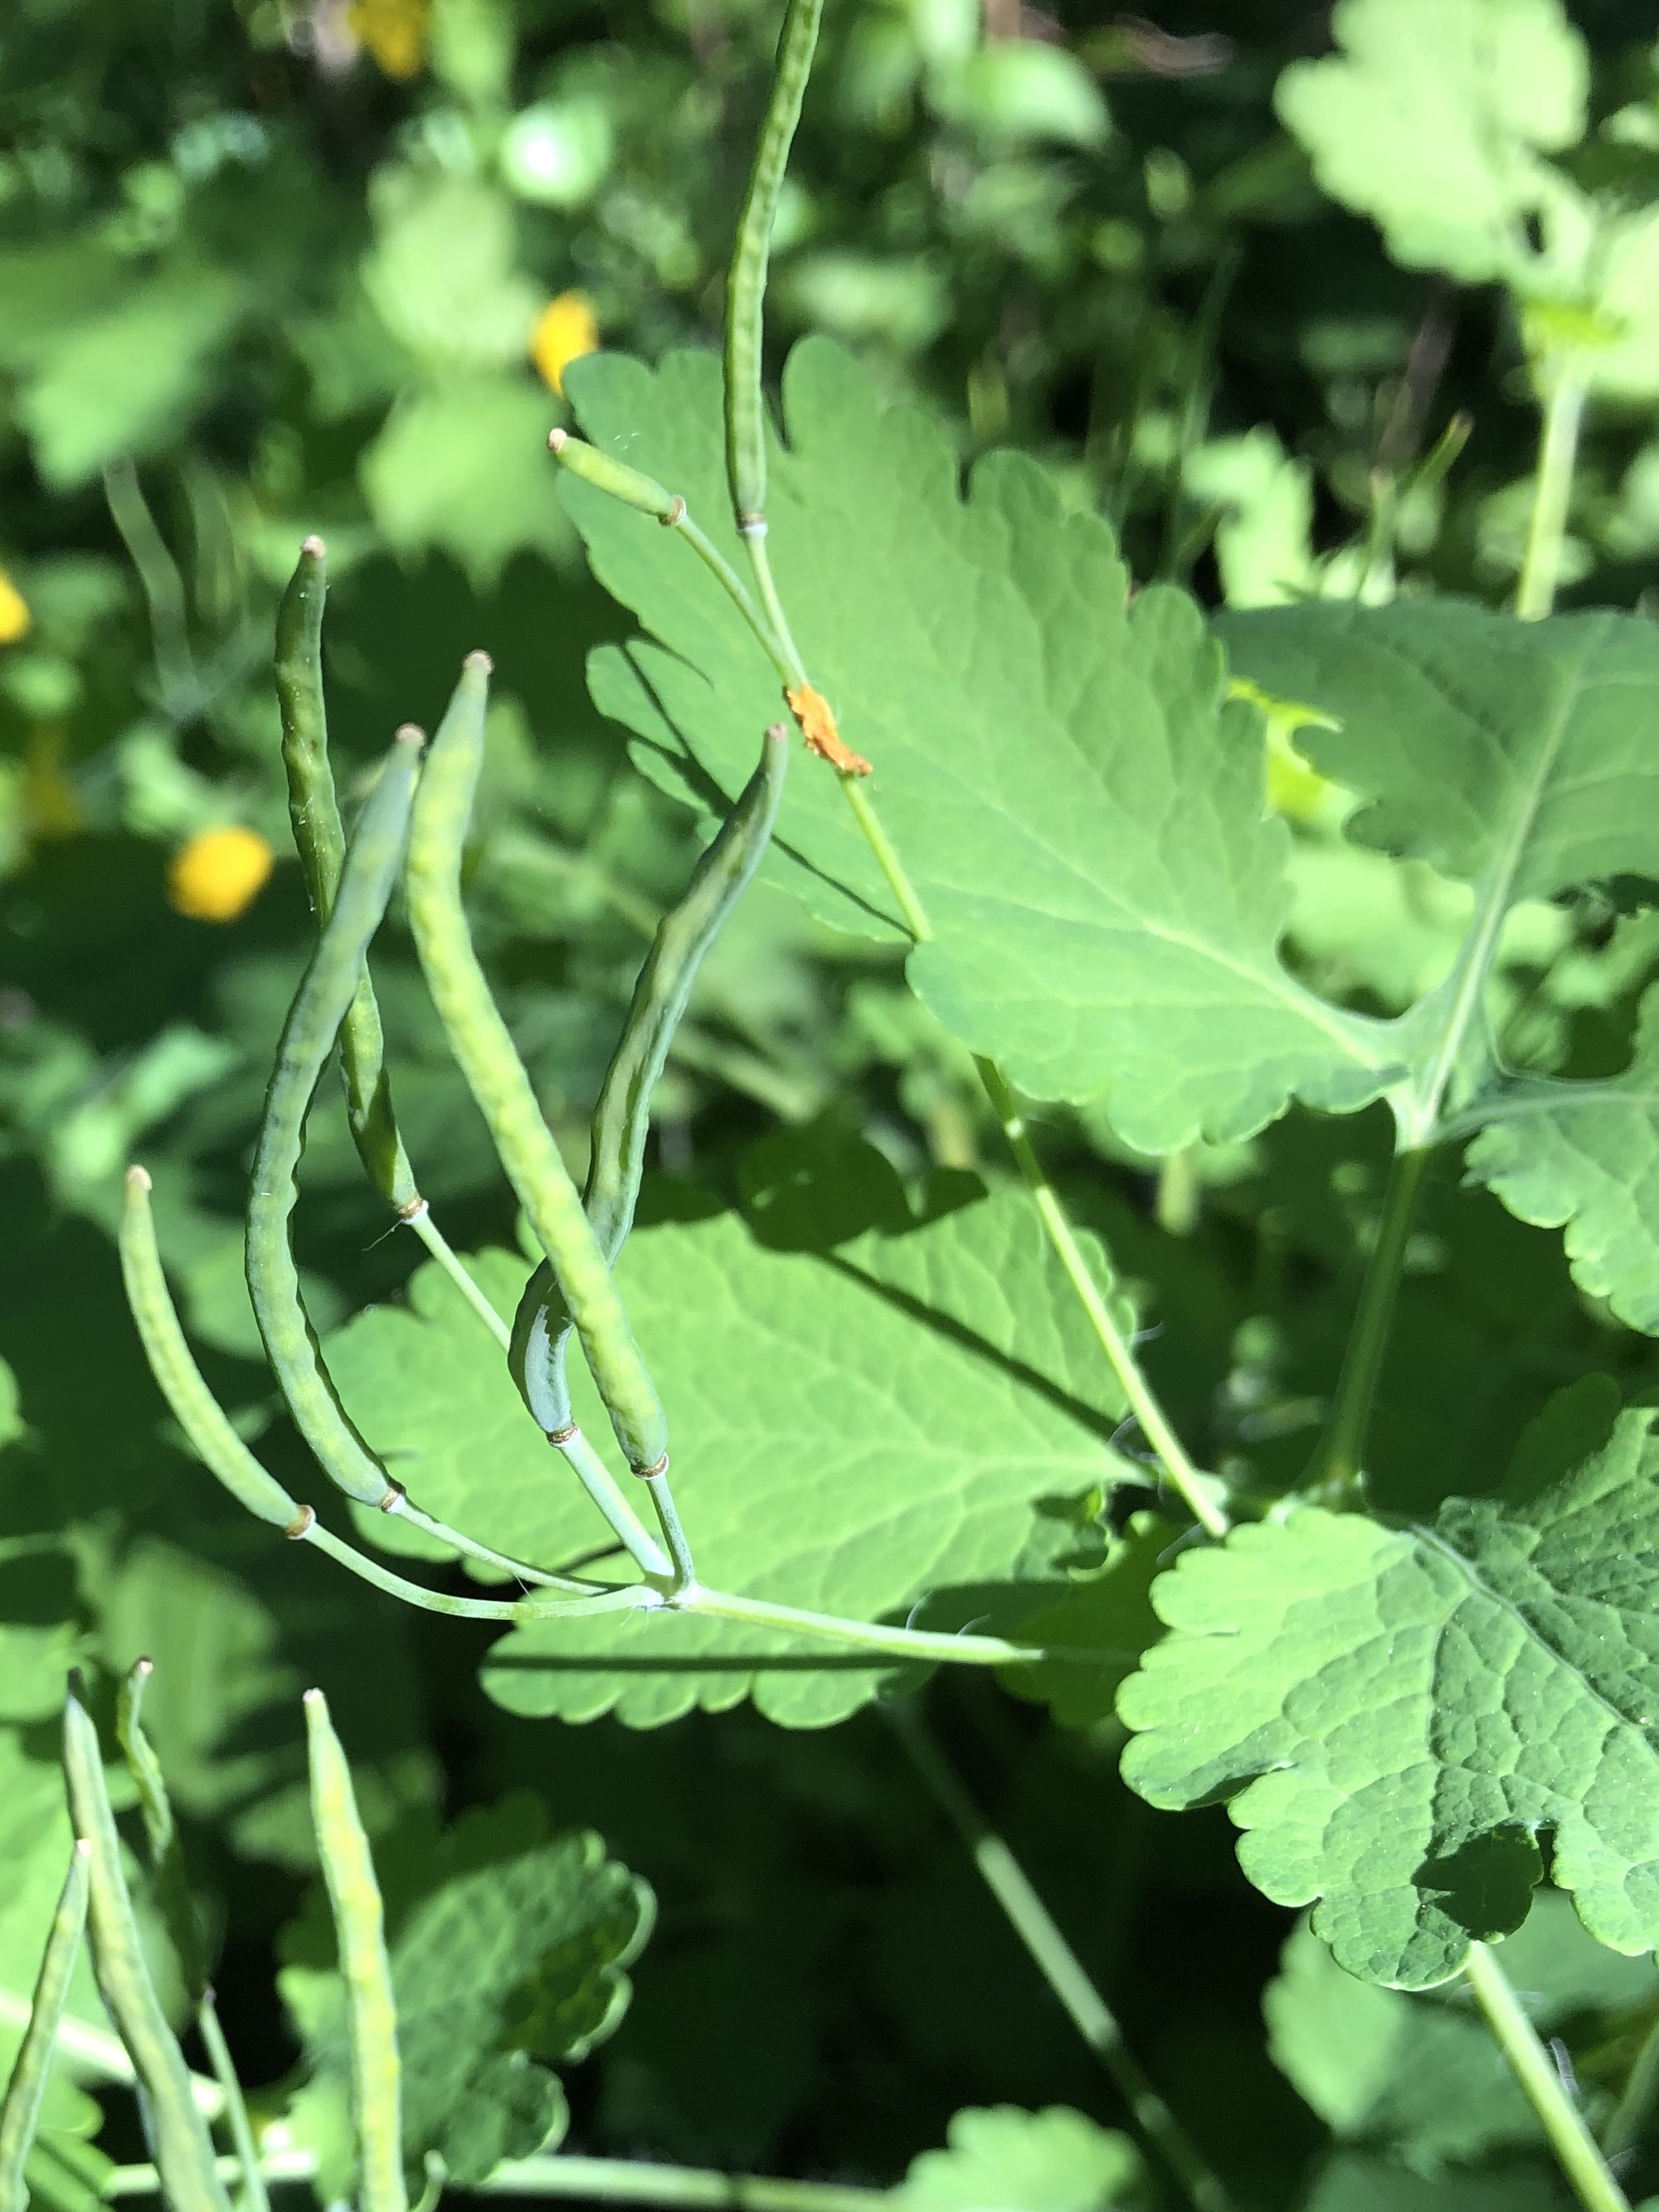 Greater Celandine seed pods by Duck Pond on May 30, 2021.